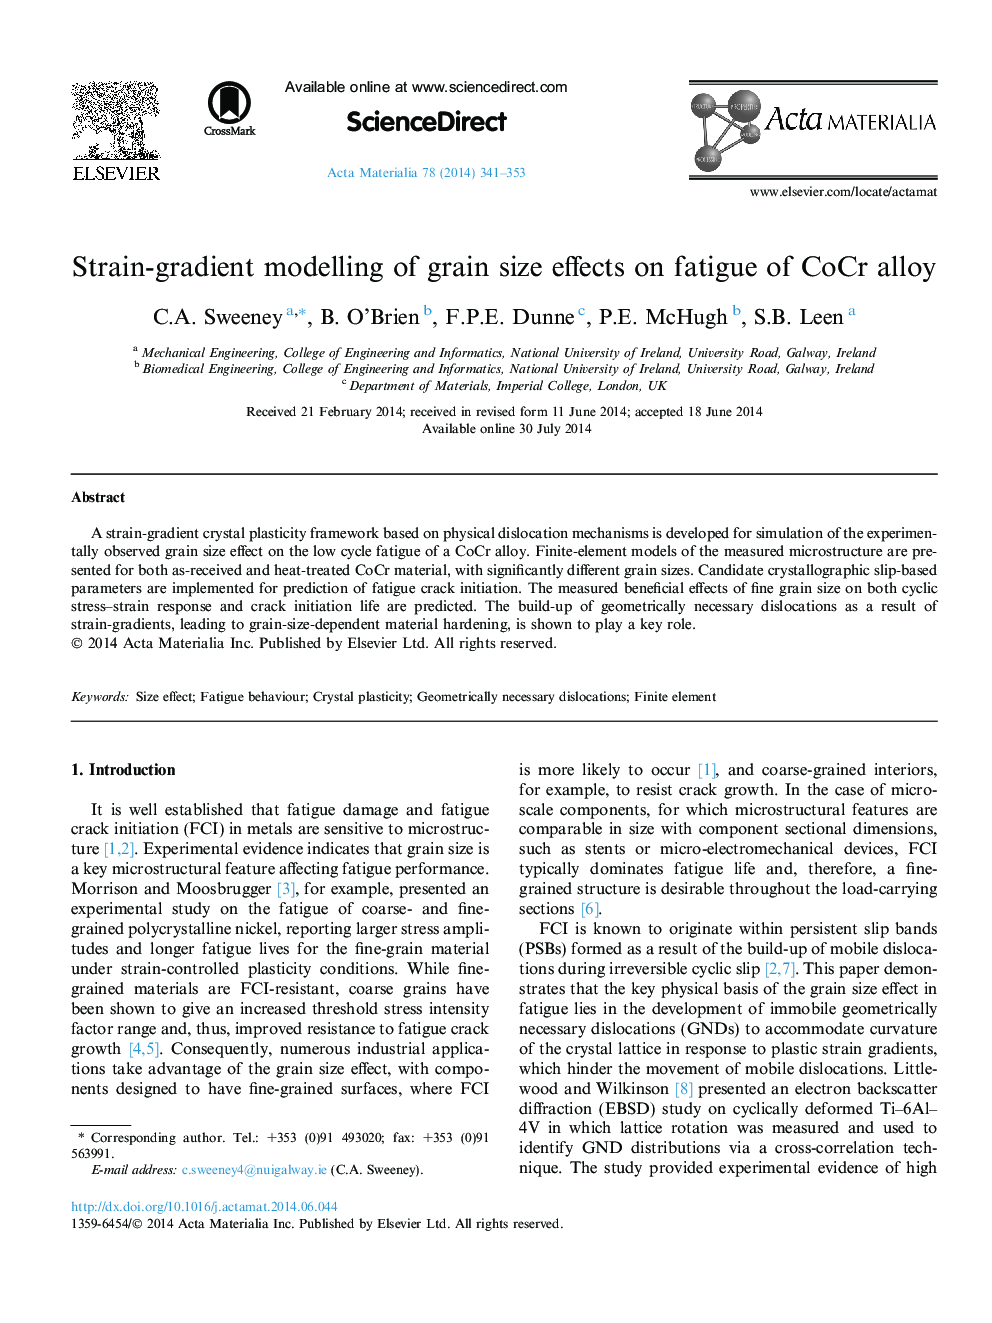 Strain-gradient modelling of grain size effects on fatigue of CoCr alloy